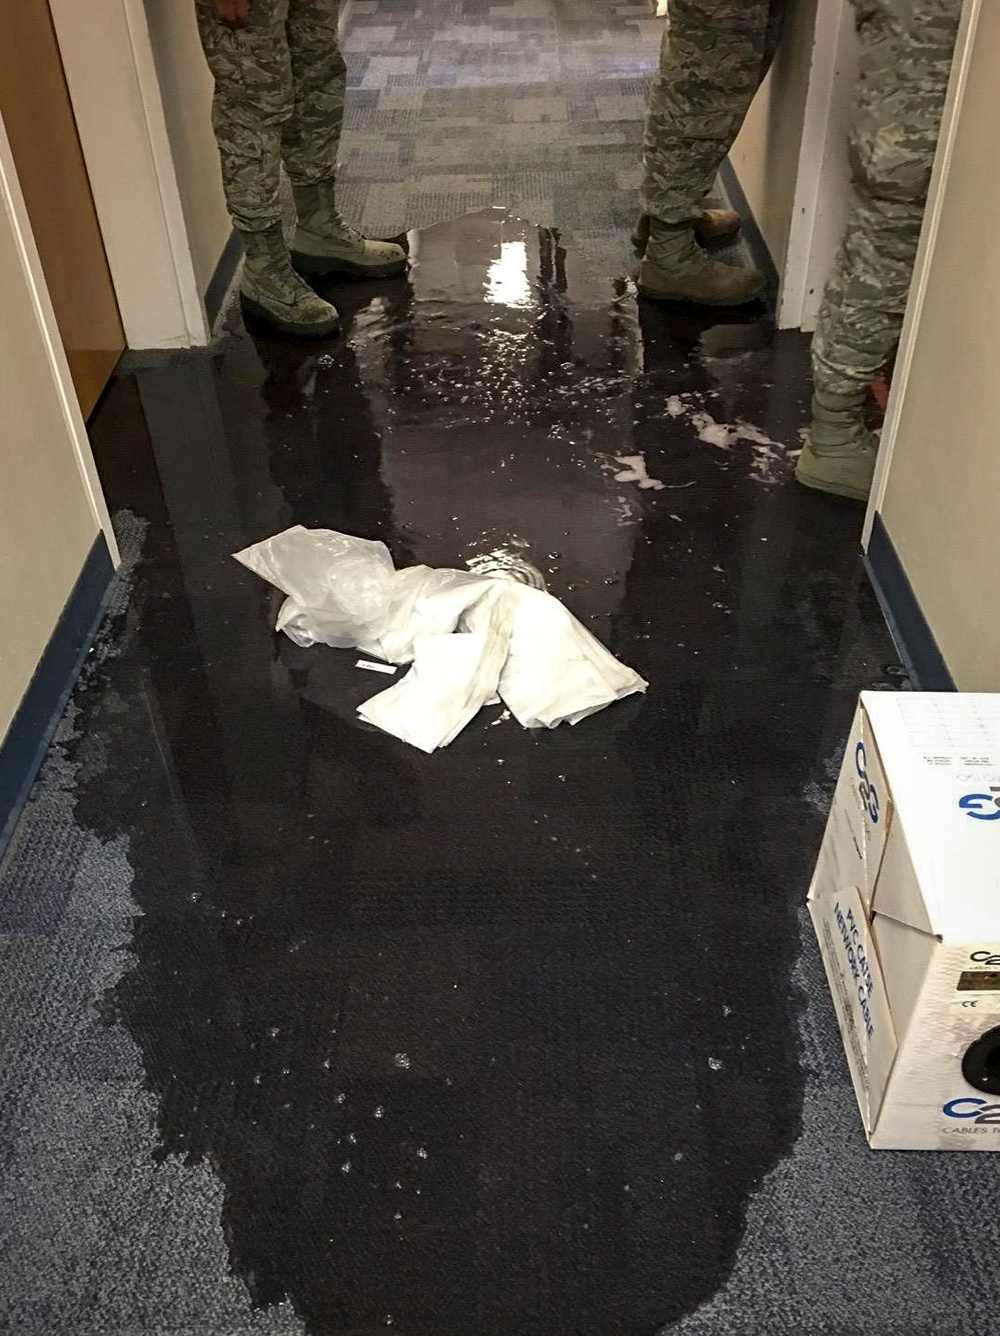 707th CS, 70th ISRW/CE combine efforts to mitigate building leak, ensure mission continues